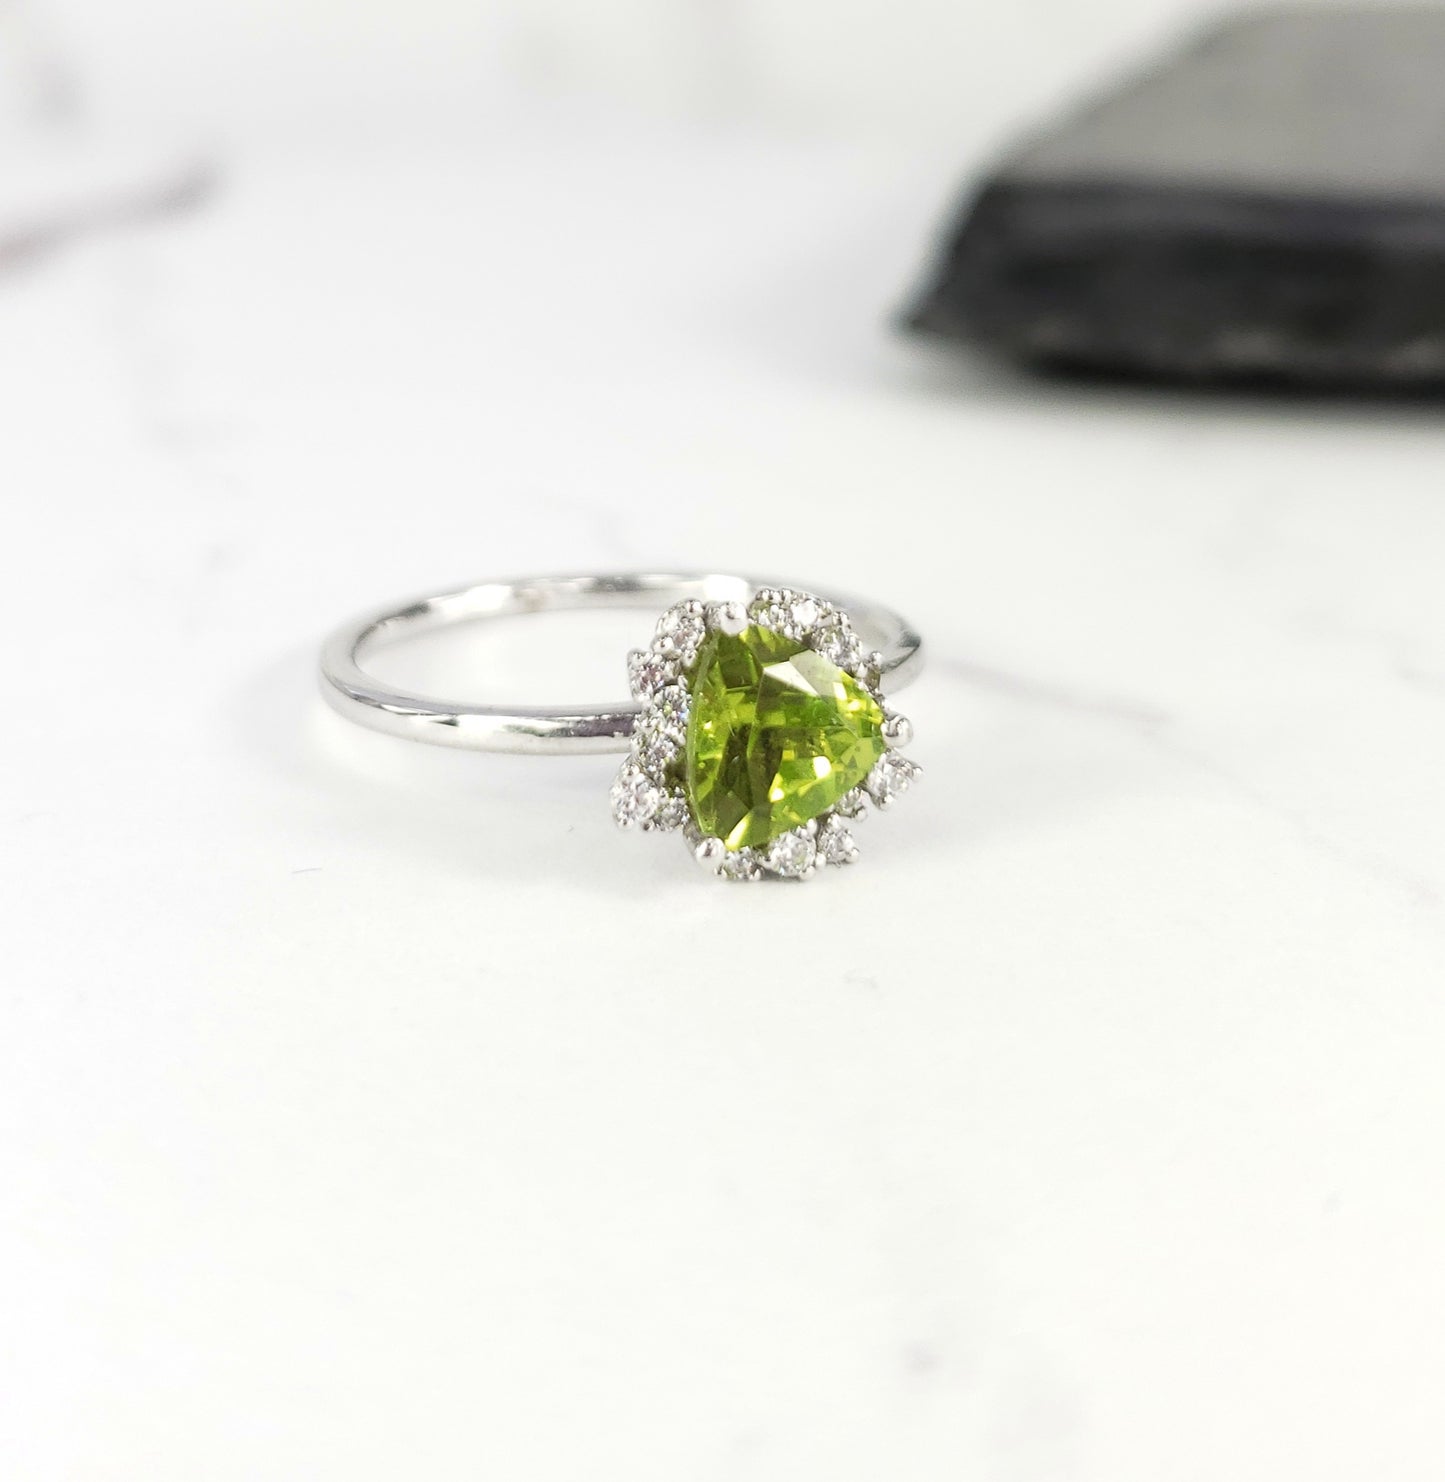 Trillion cut peridot ring with diamonds in white gold